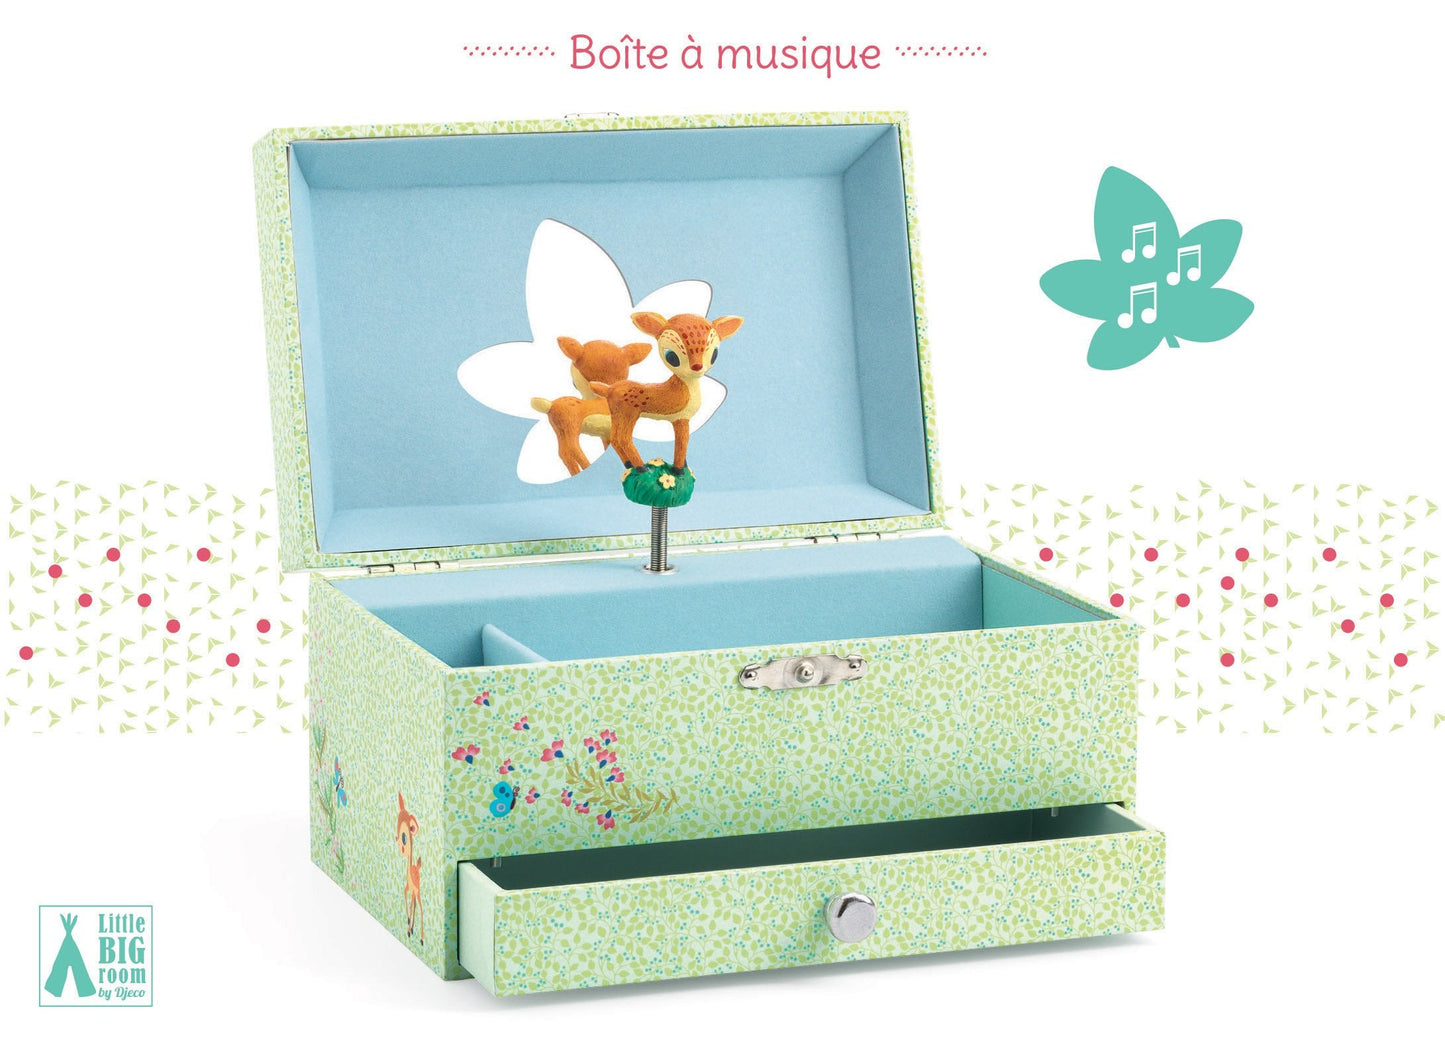 The Fawn's Song Musical Treasure Box